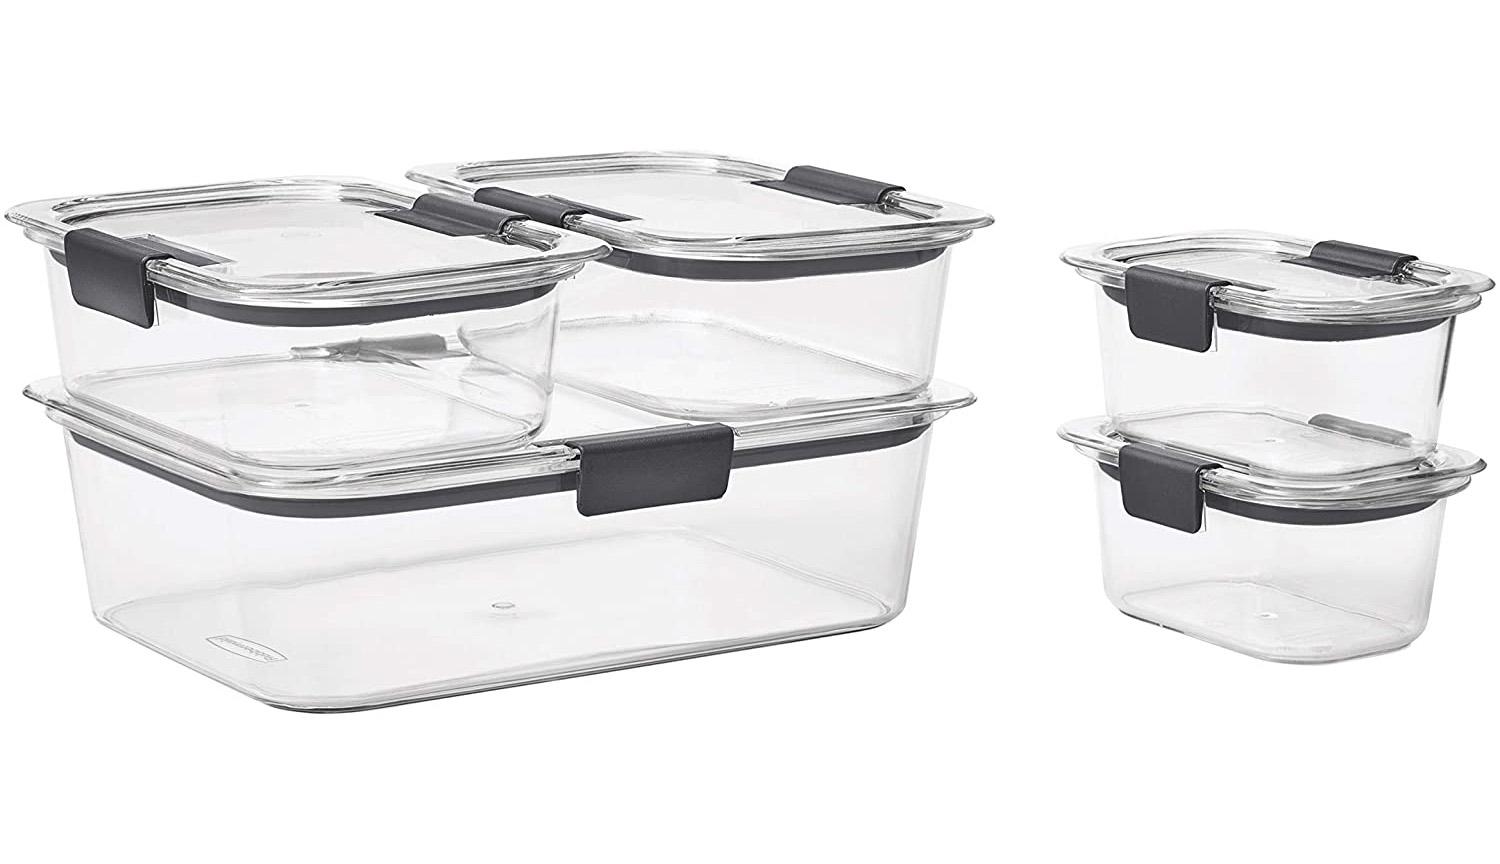 Rubbermaid 10-Piece Brilliance Plastic Food Storage Containers for $16.10